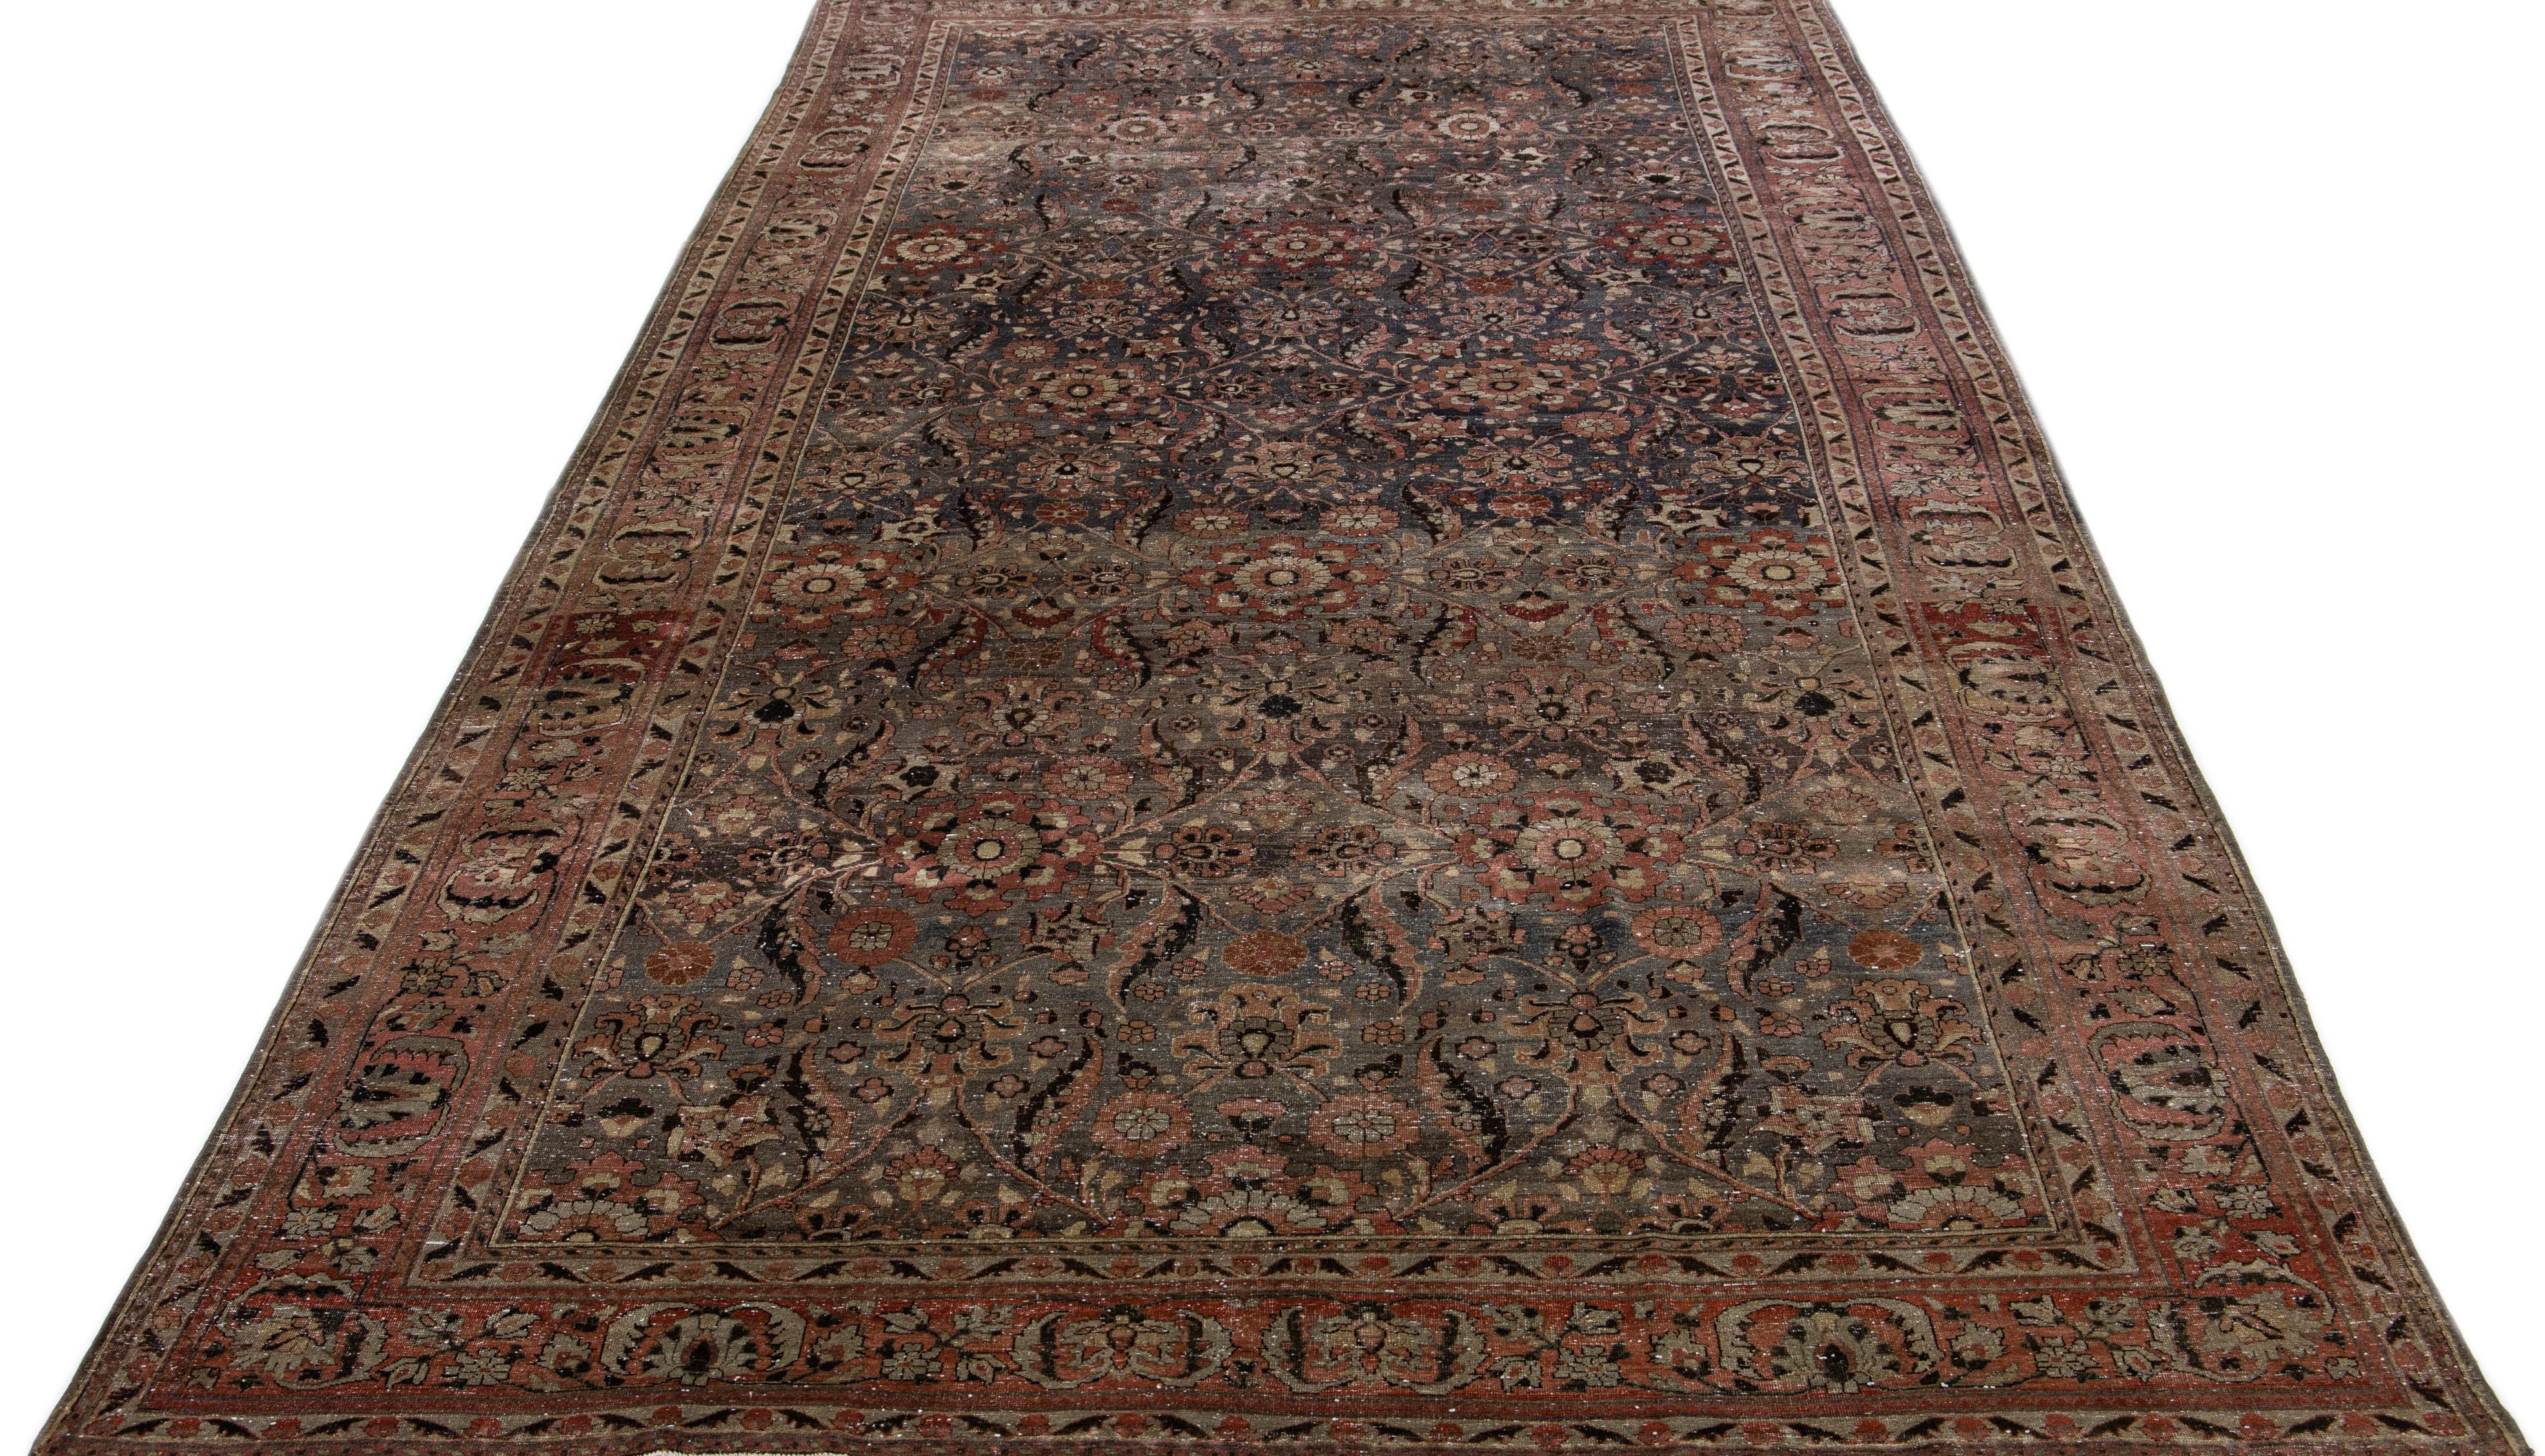 This magnificent Antique Malayer rug is hand knotted from Wool in a delightful gray hue. Its intricately patterned floral motifs come alive with vivid multi-hued accents.
 
This rug measures: 8' x 16'4